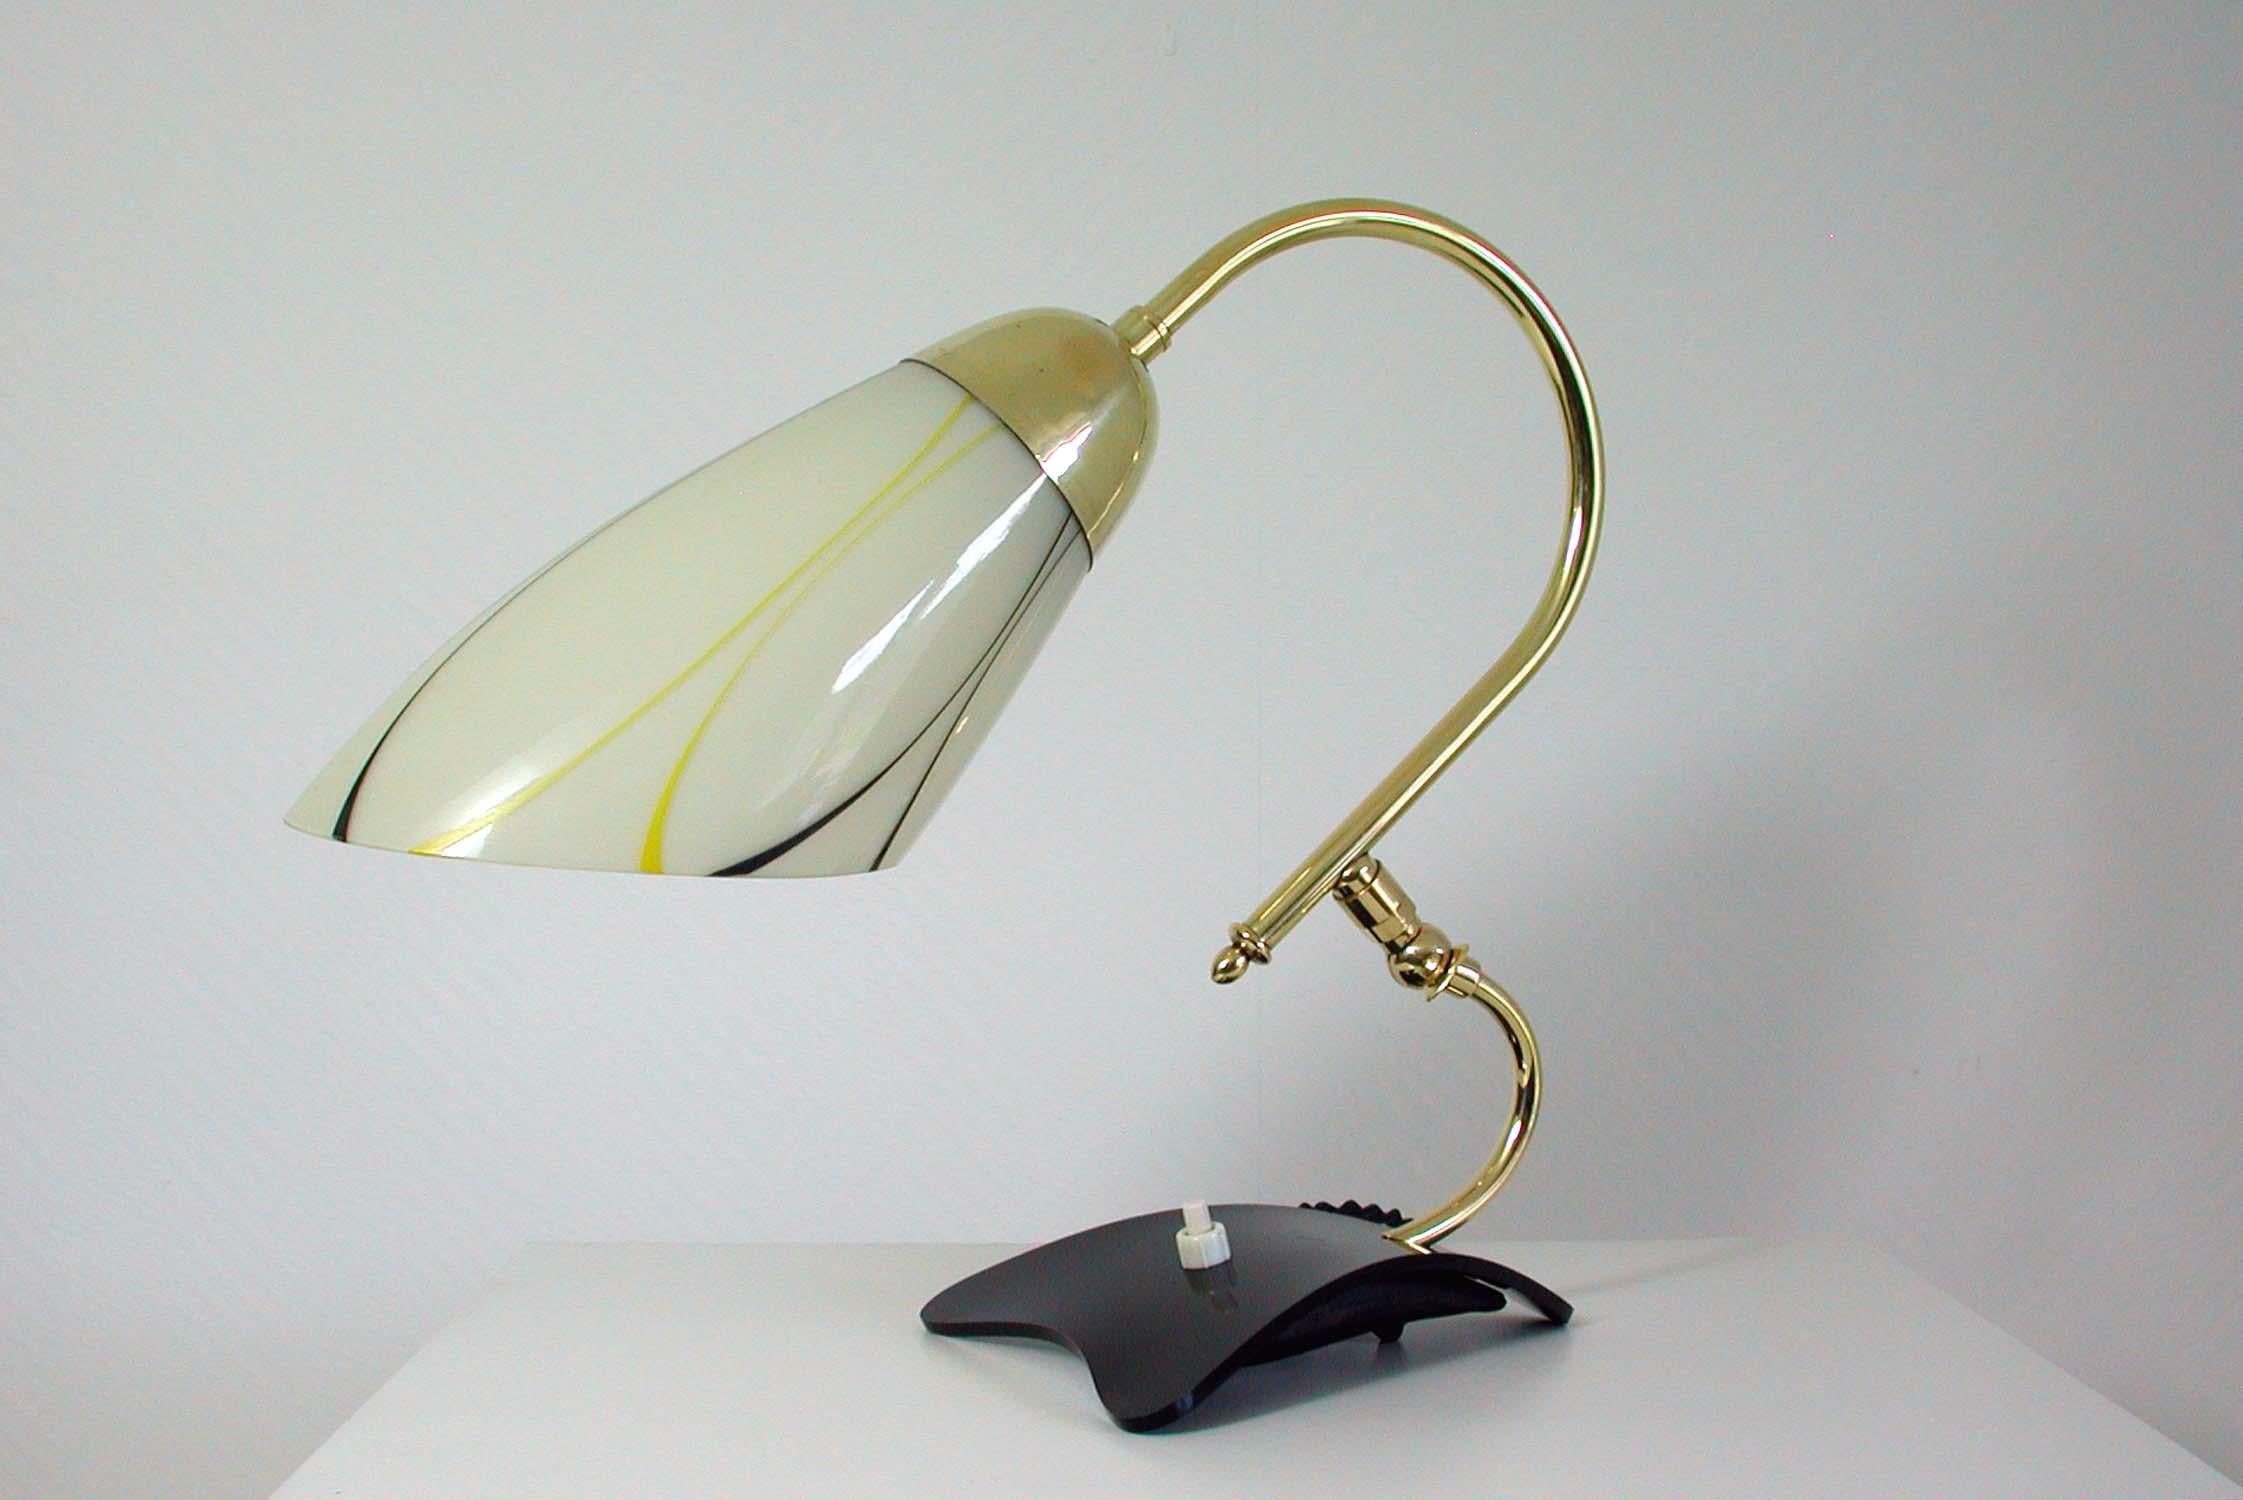 Mid-Century Modern German Midcentury Adjustable Yellow, Black and White Table Lamp, 1950s For Sale